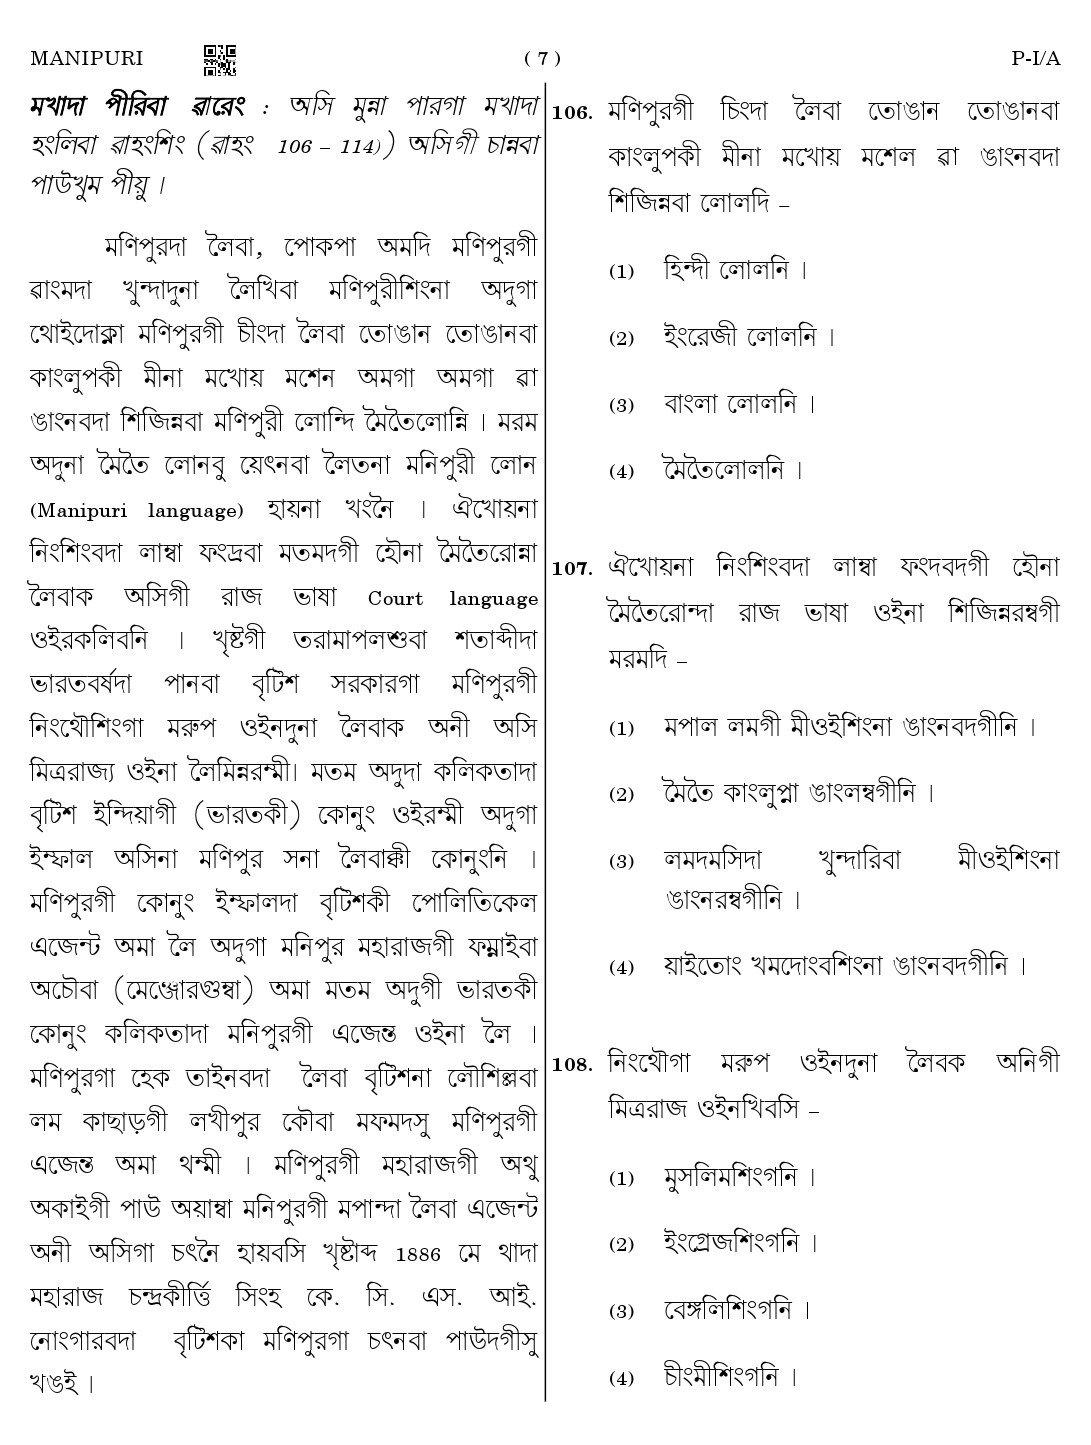 CTET August 2023 Manipuri Paper 1 Part IV and V 7